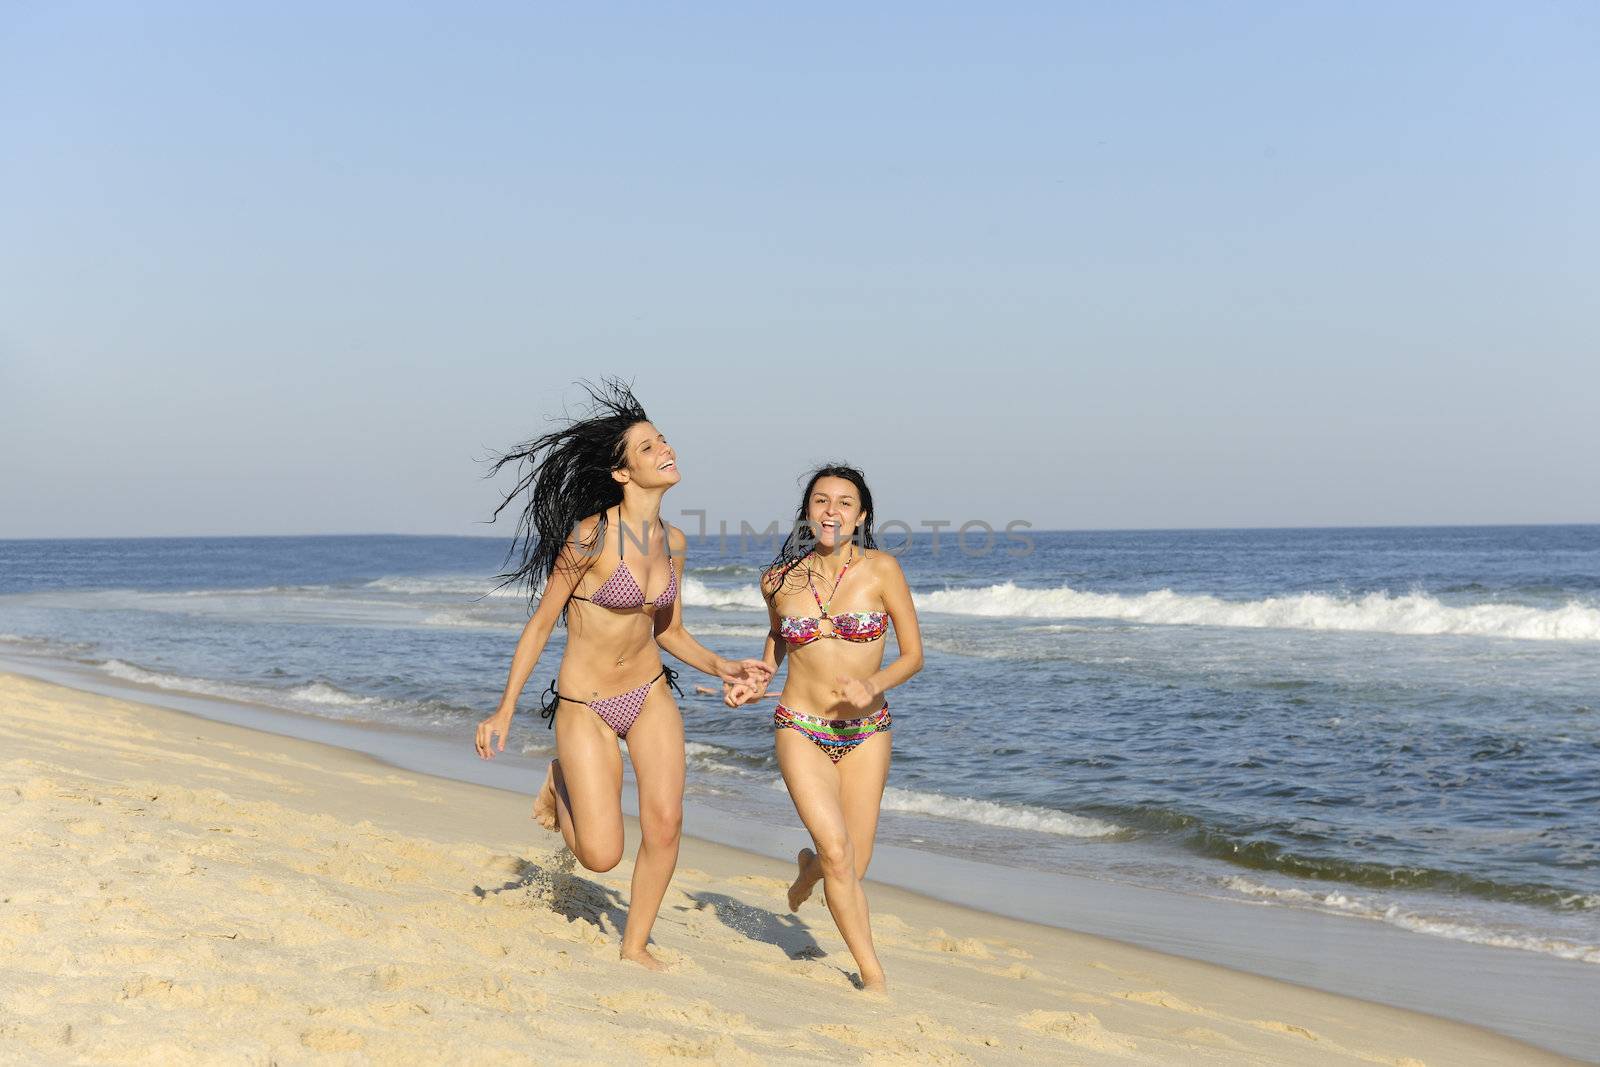 holiday fun: two girls having a racing duel on the beach